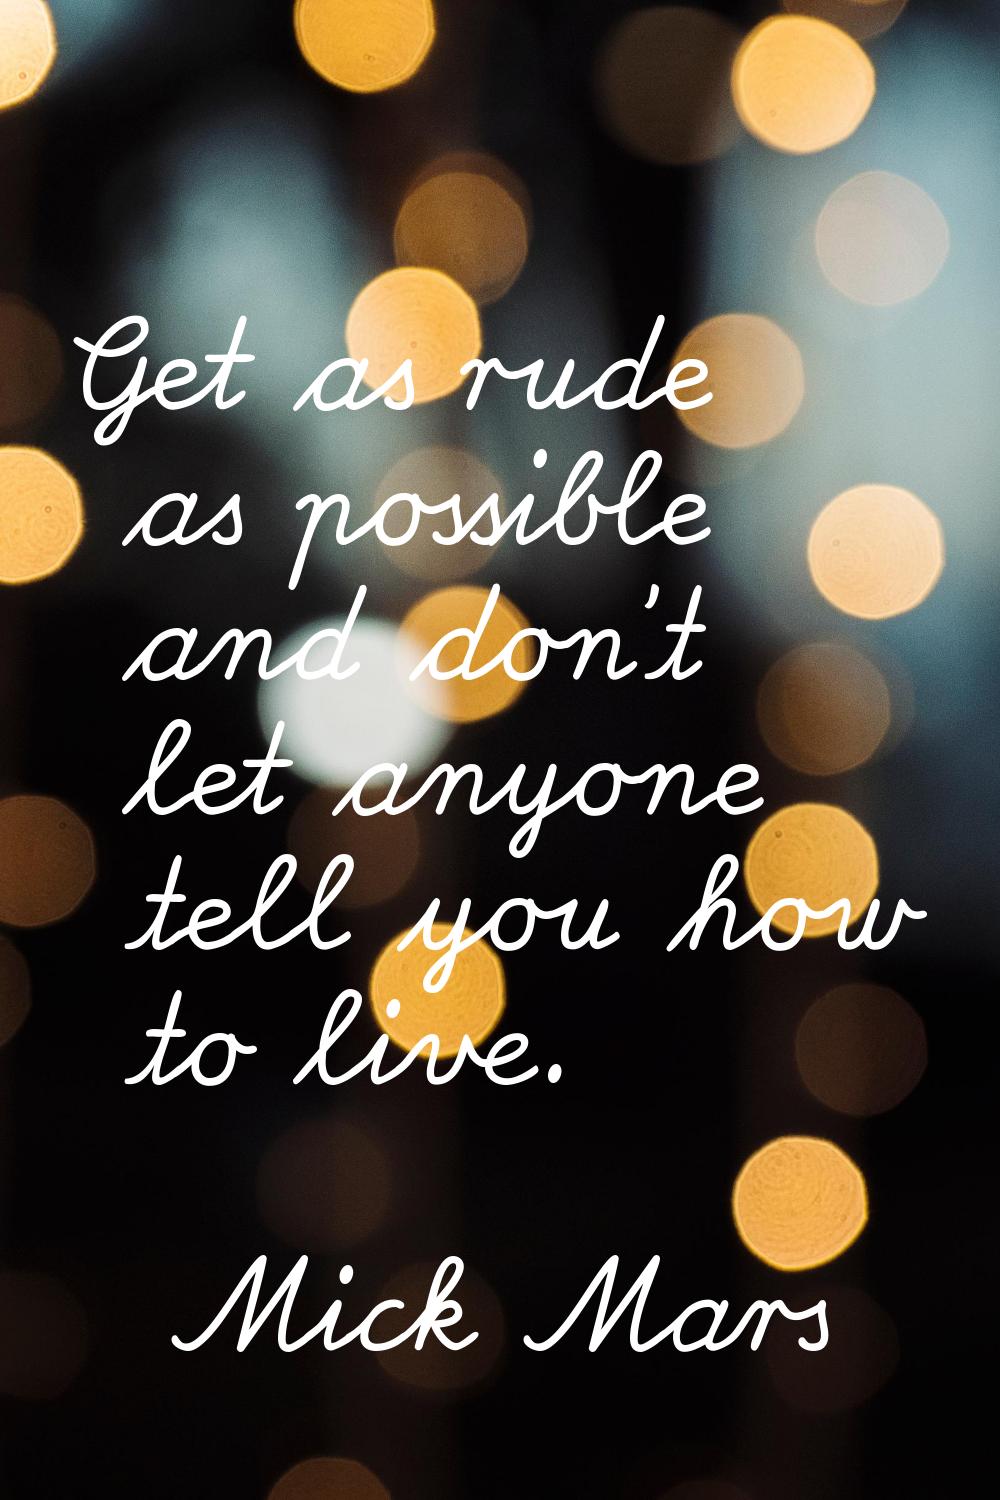 Get as rude as possible and don't let anyone tell you how to live.